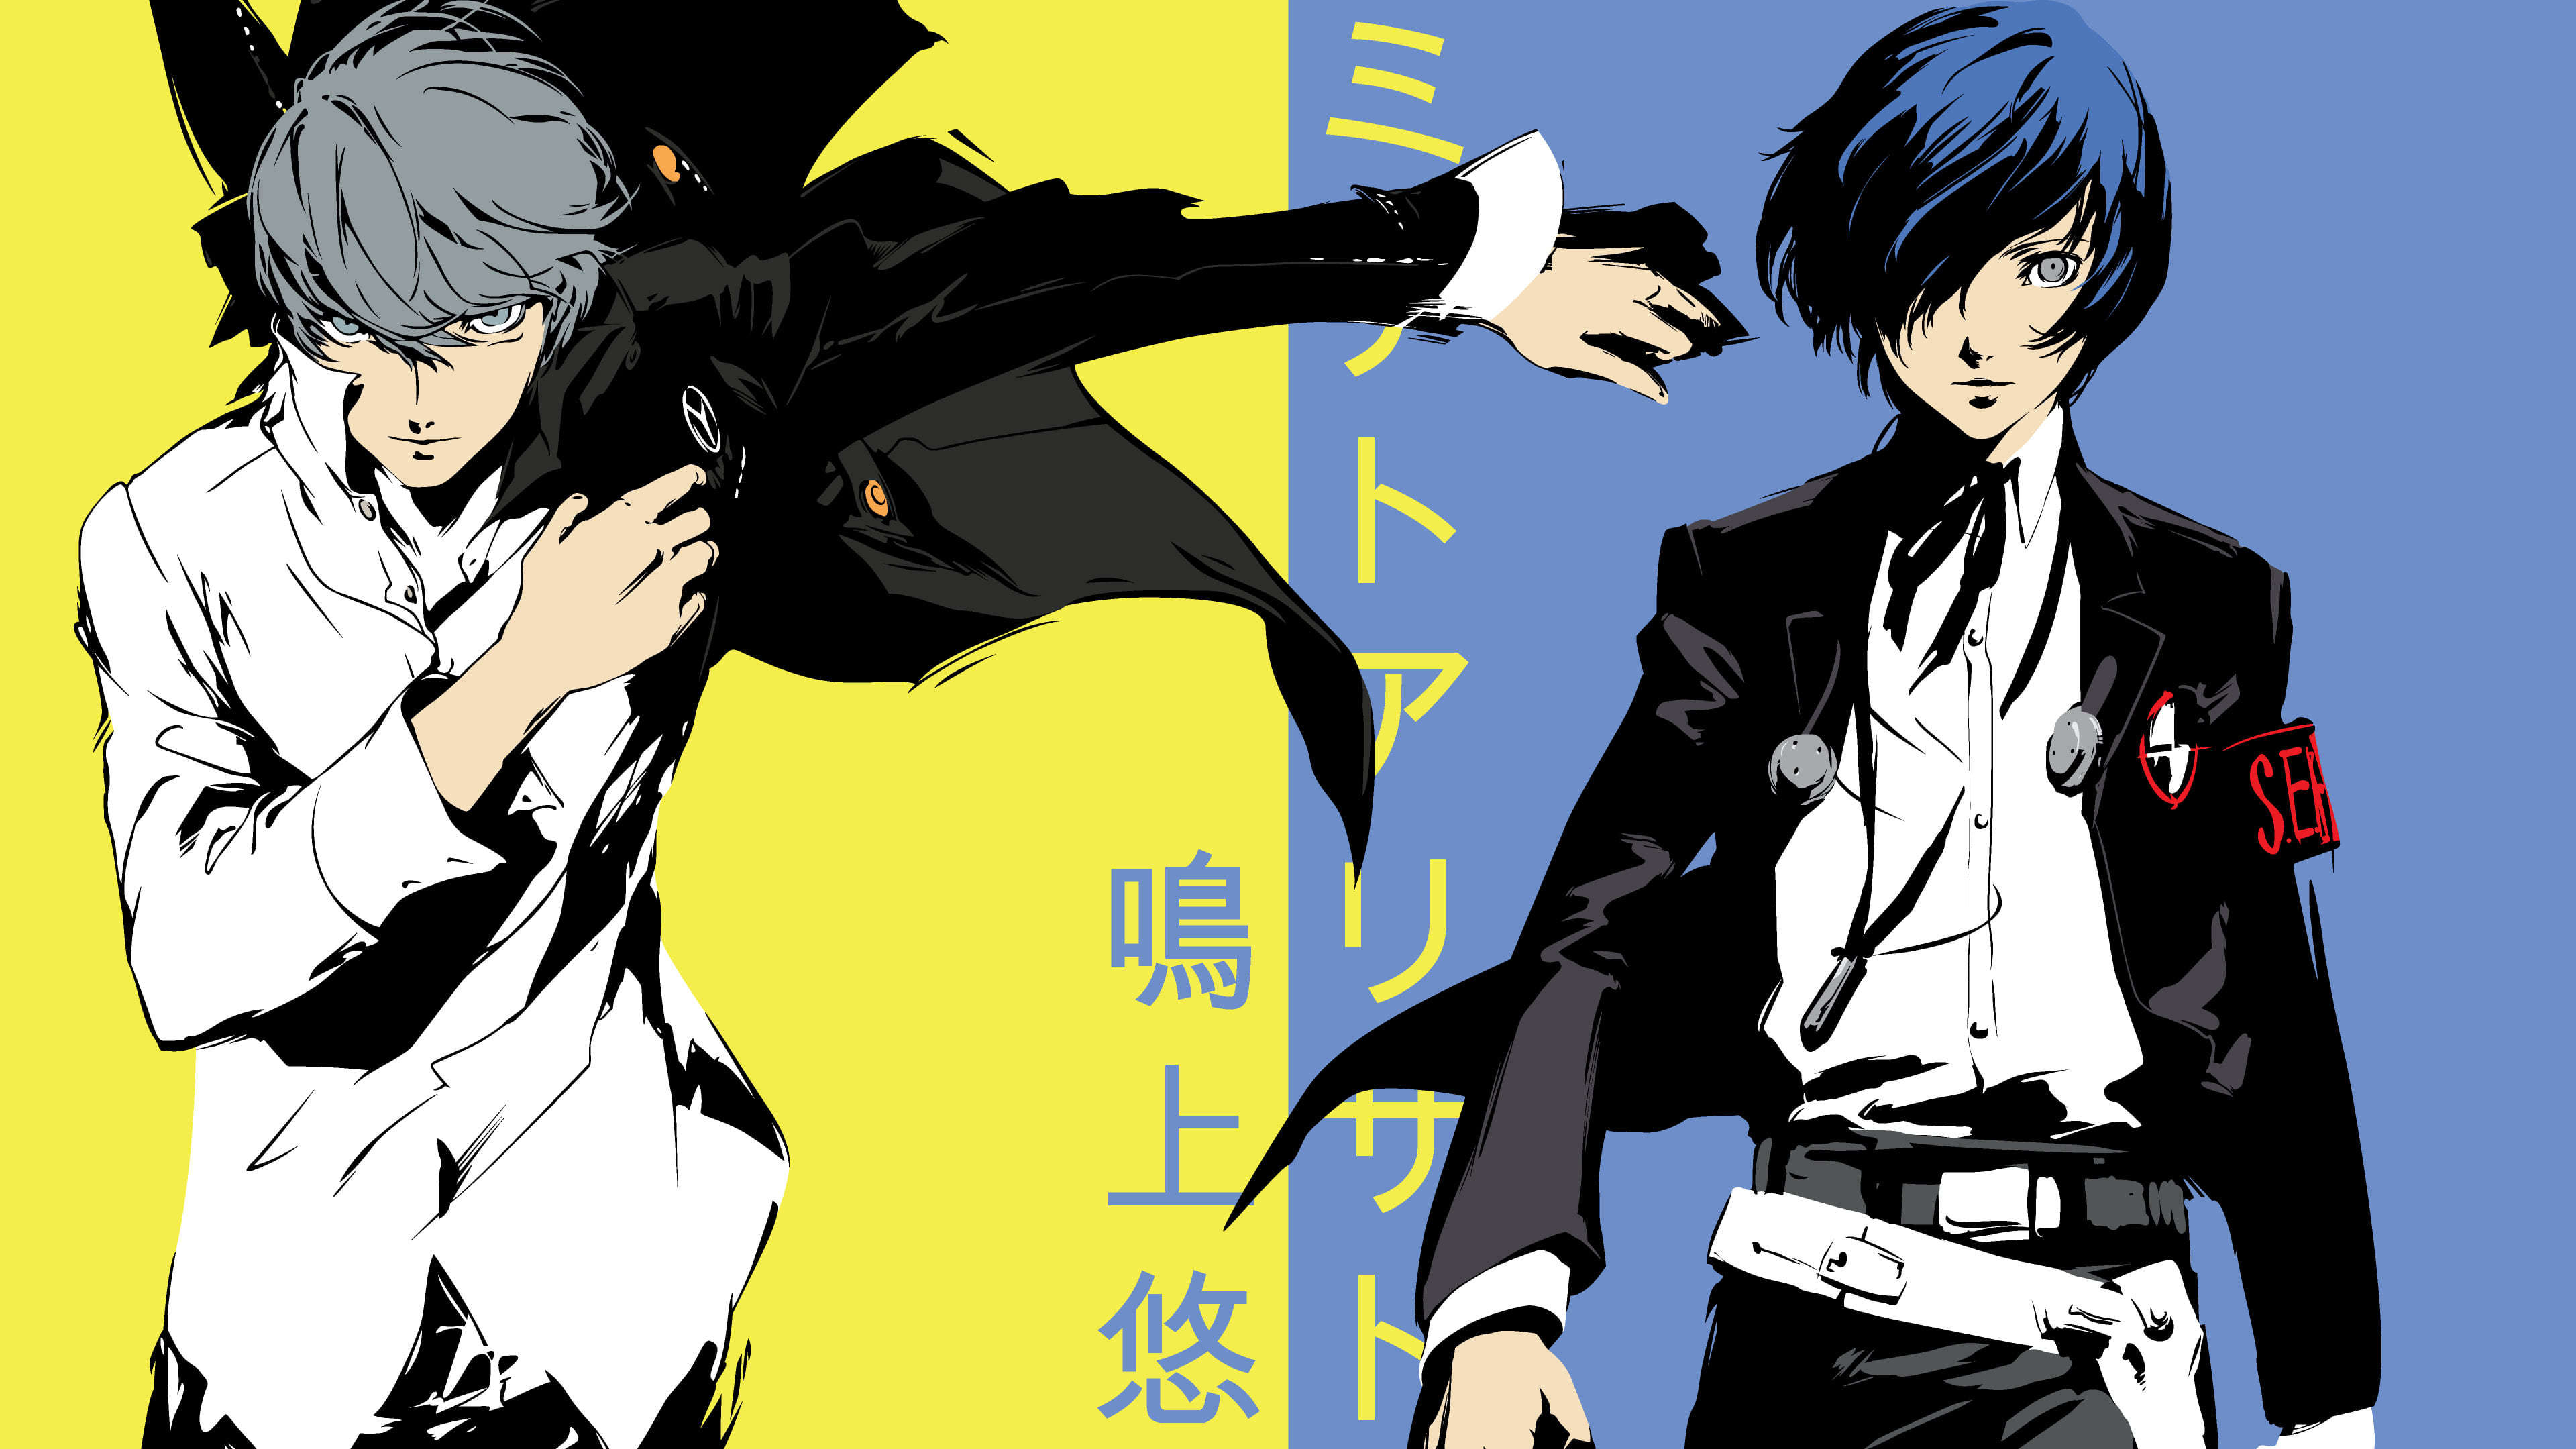 Persona Wallpapers